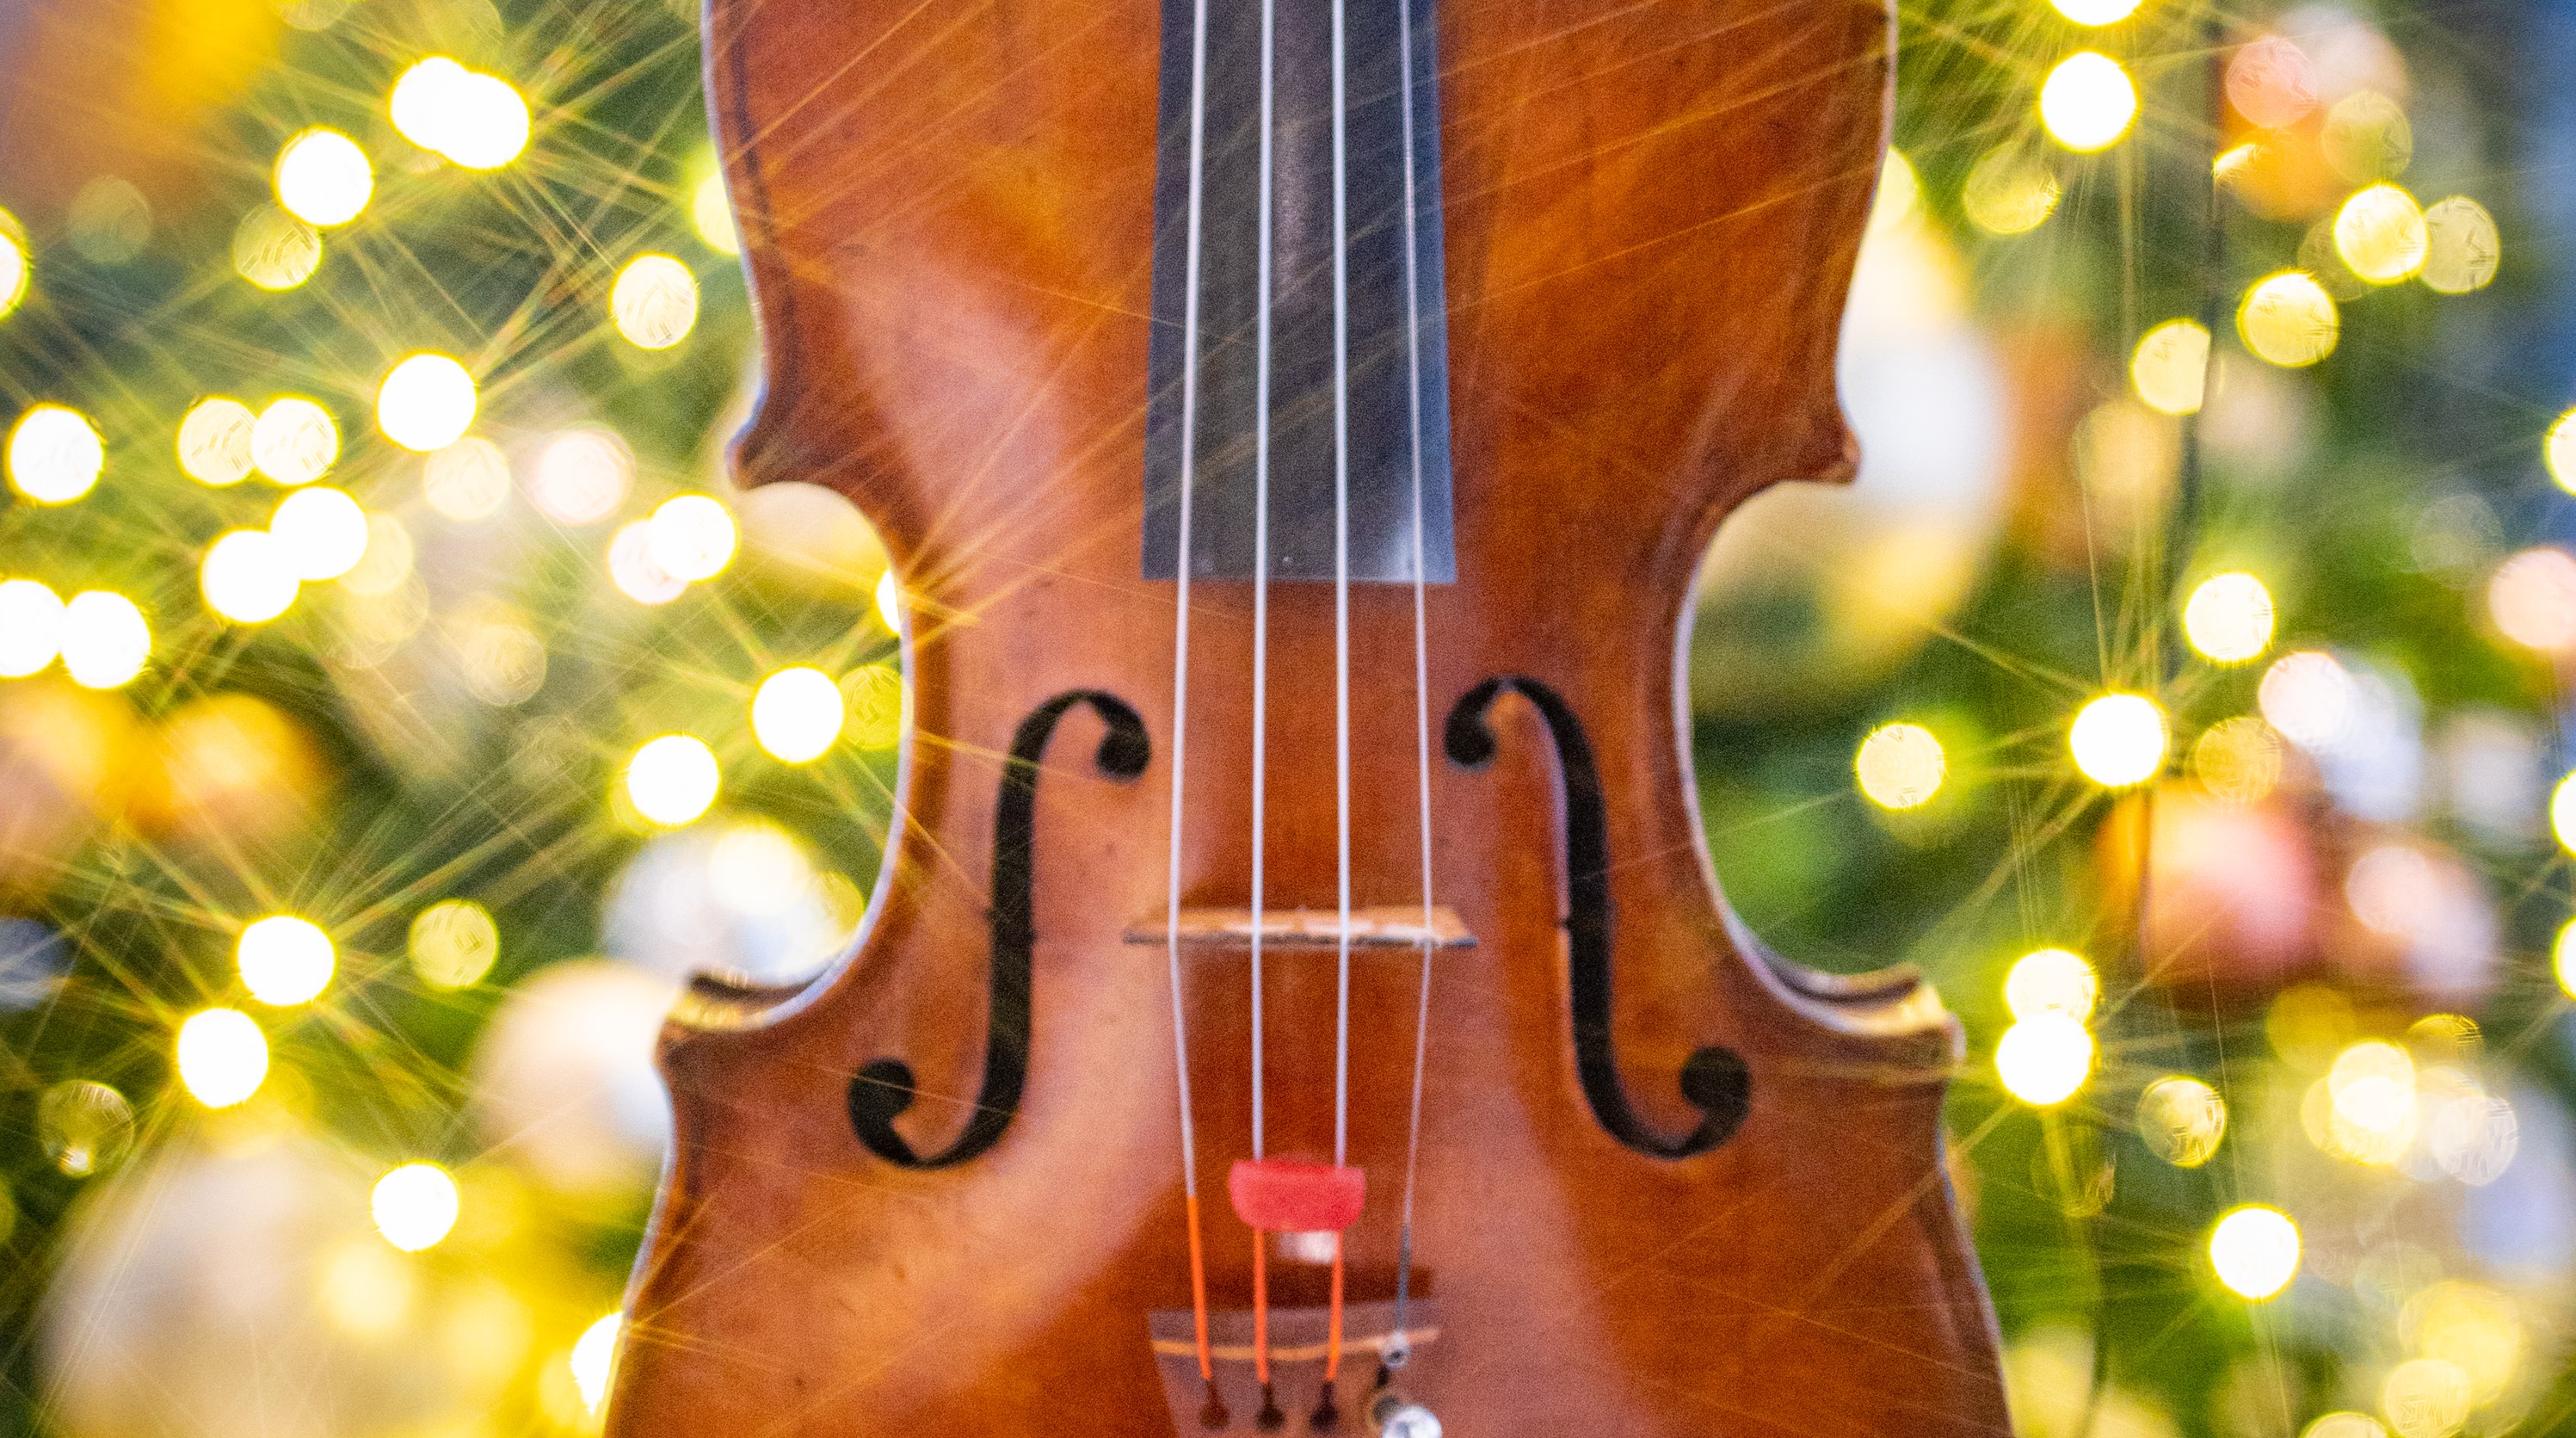 Violin with lights behind it